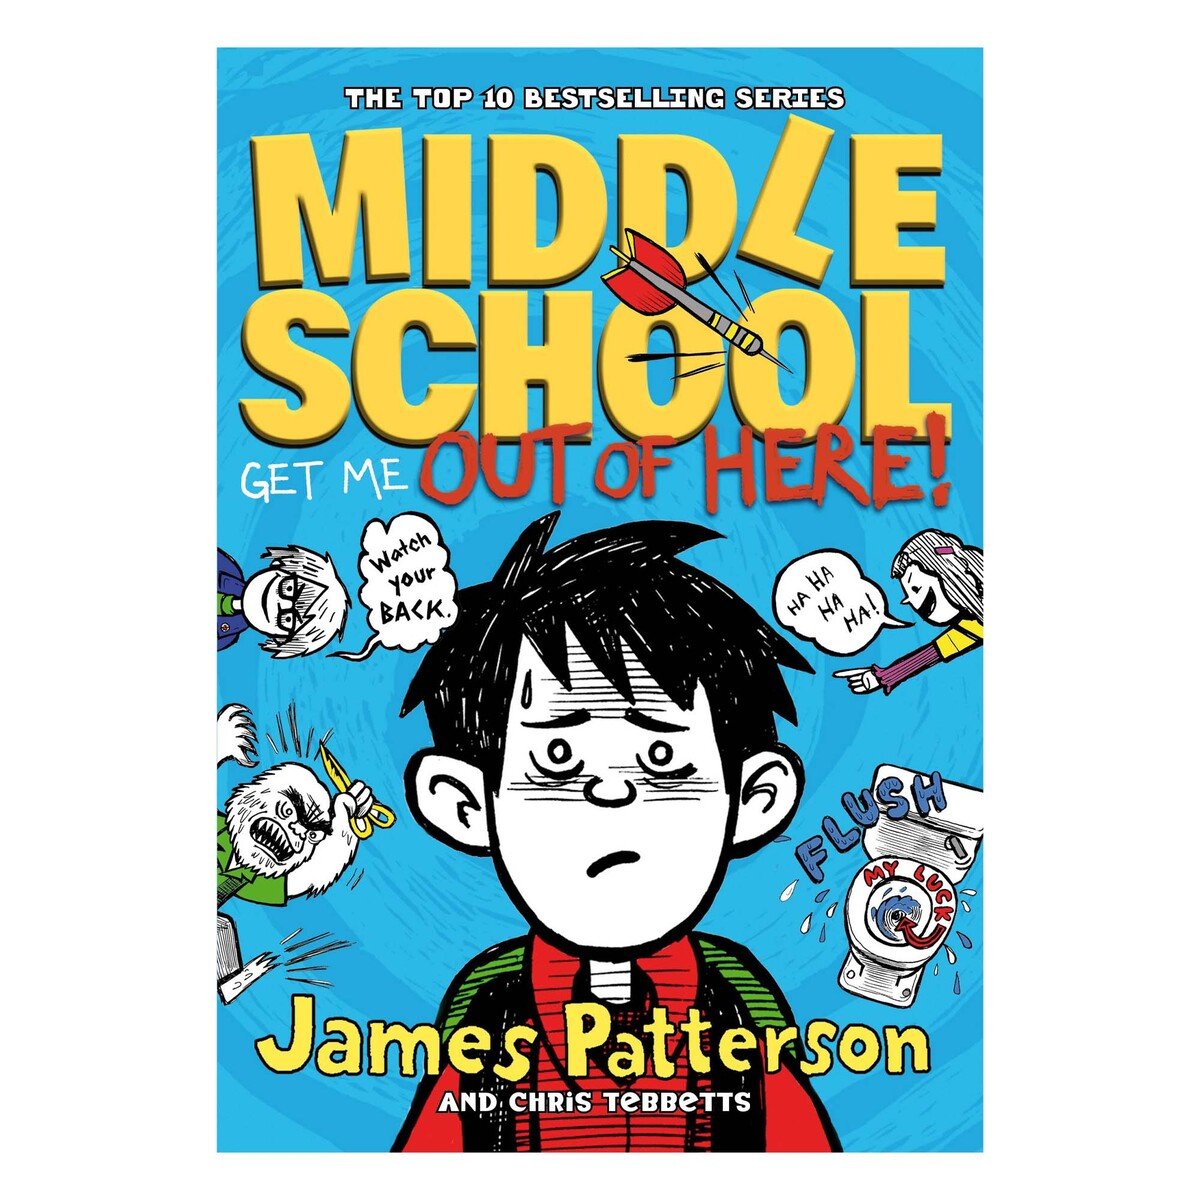 Middle School Get me Out of Here by James Patterson and Chris Tebbetts